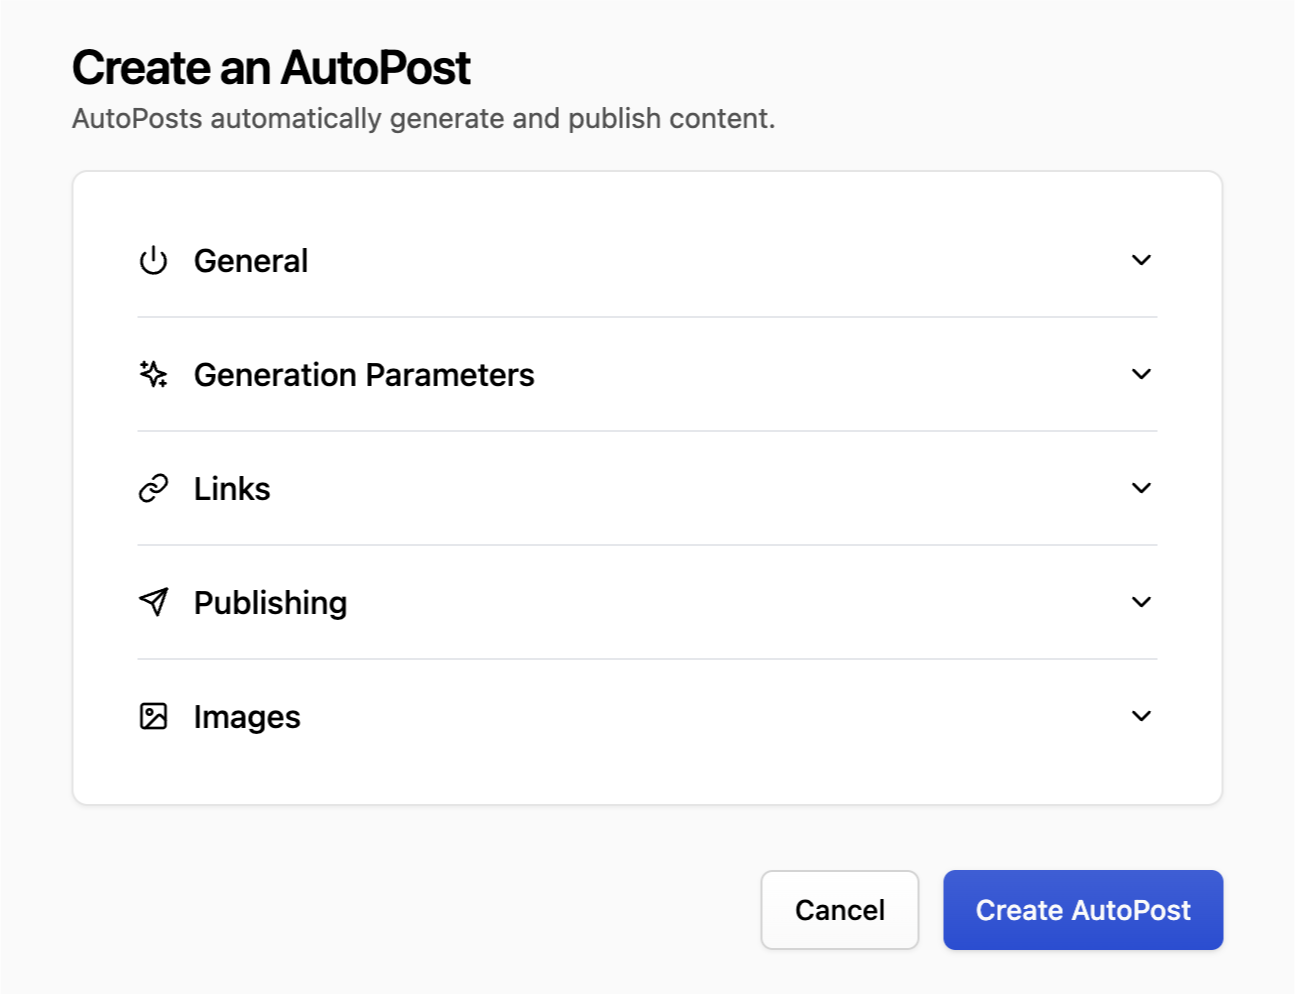 A modal prompting the user to create an AutoPost with configuration options